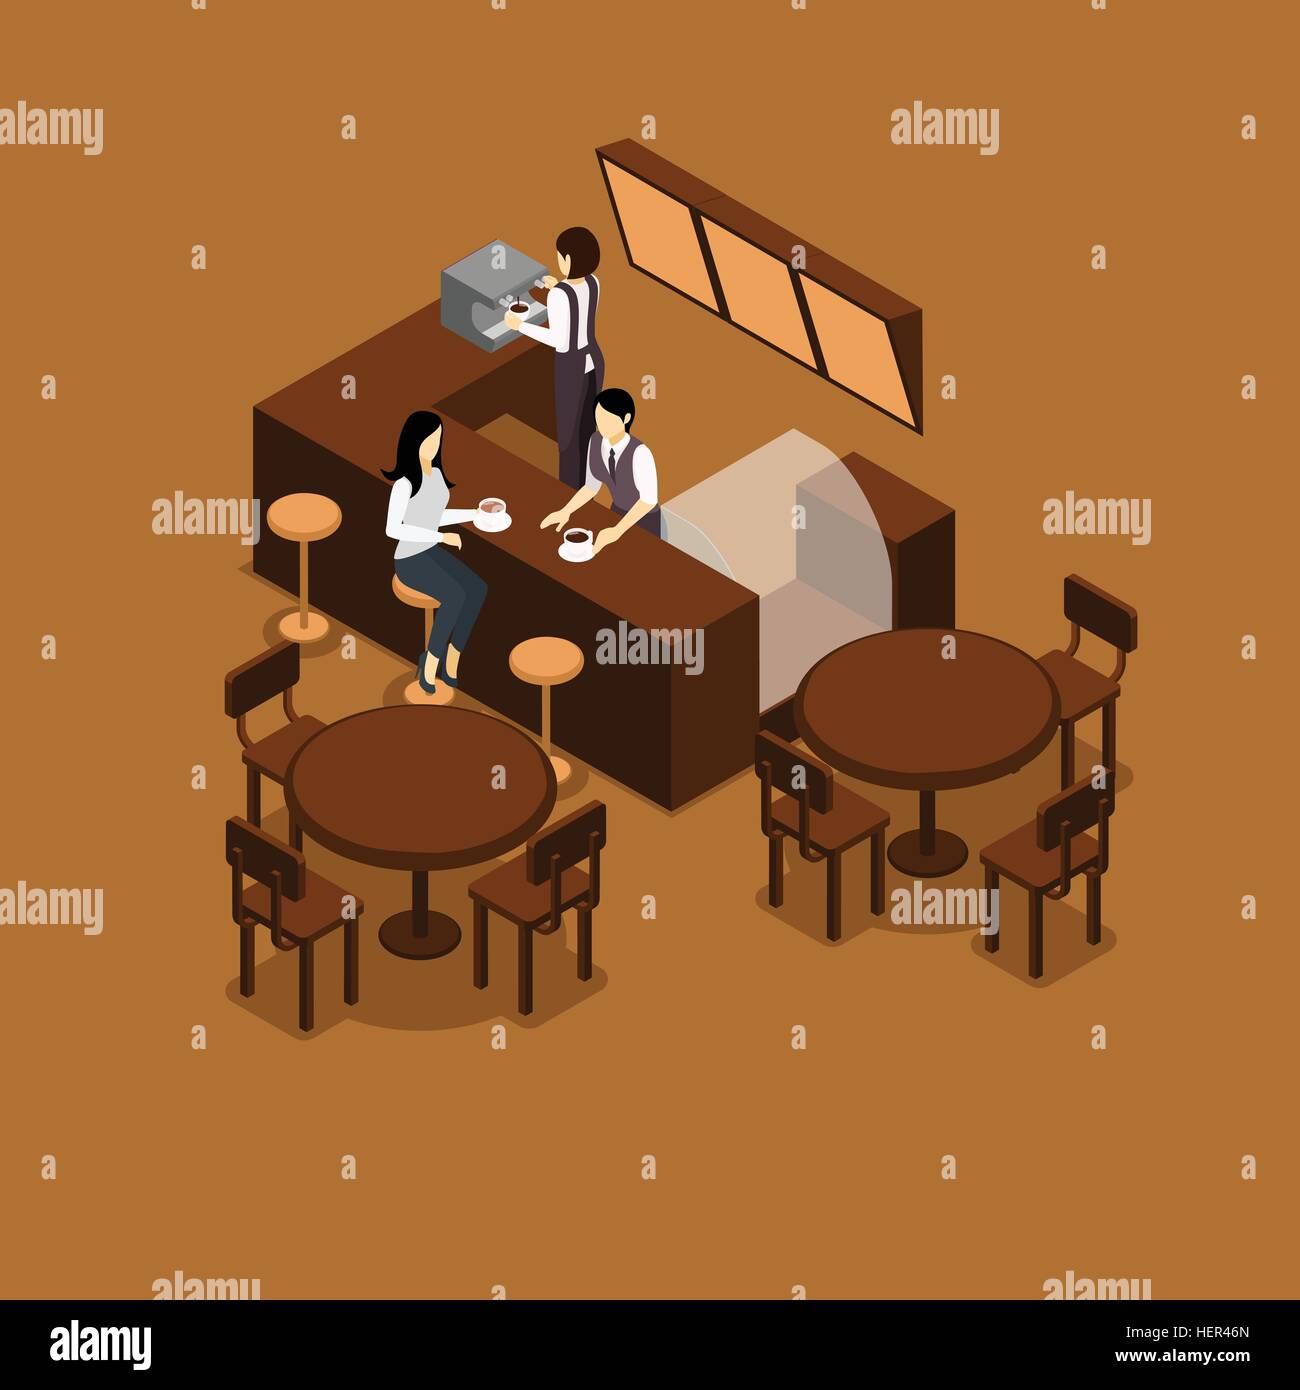 Waitress Isometric Illustration . Waitress barista making coffee for people in a cafe isometric vector illustration Stock Vector